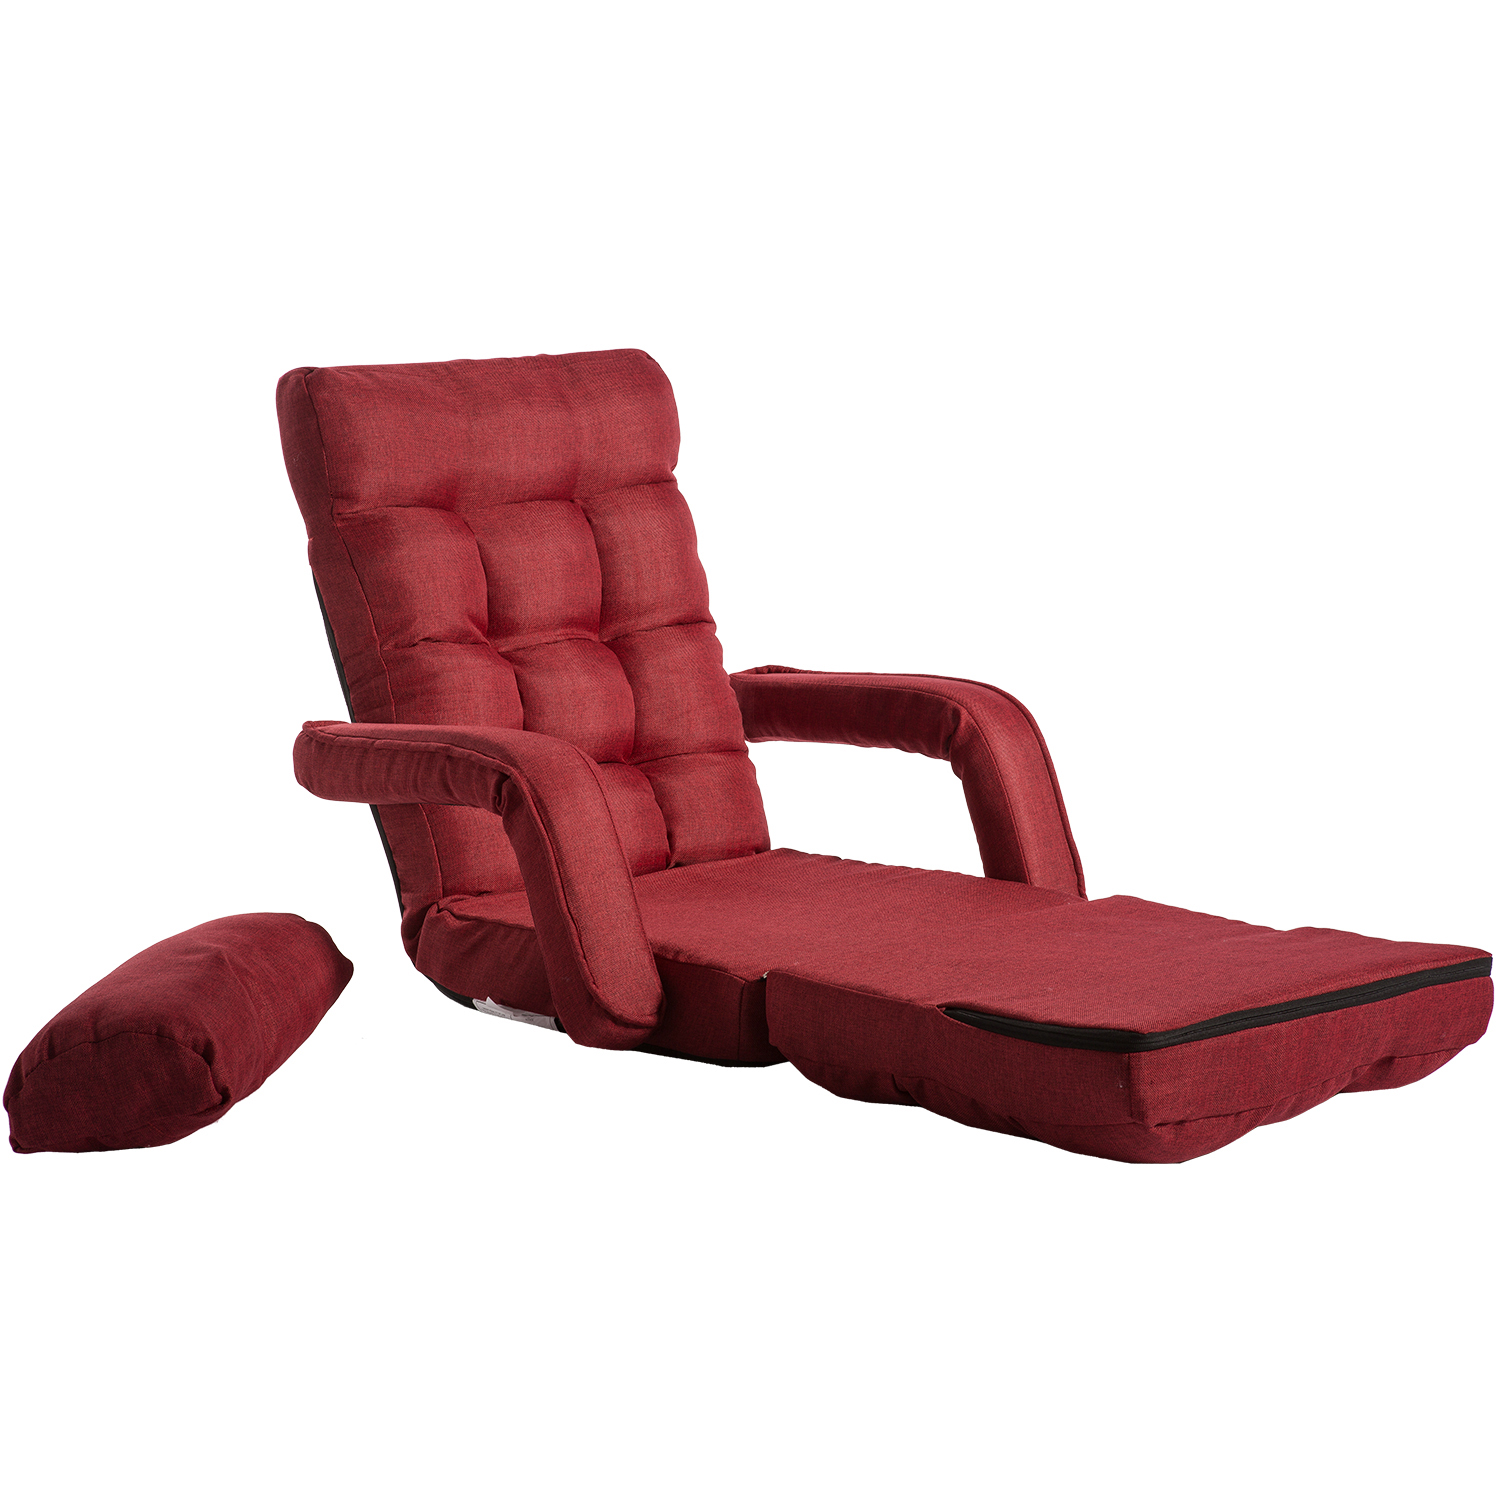 Floor Chair Set with Adjustable Backrest, Folding Chair with Armrests and a Pillow, Lazy Sofa Floor Chair Sofa Lounger Couch for Living Room Bedroom Dorm Office, No Assembly Required, Red, Q6294 - image 2 of 10